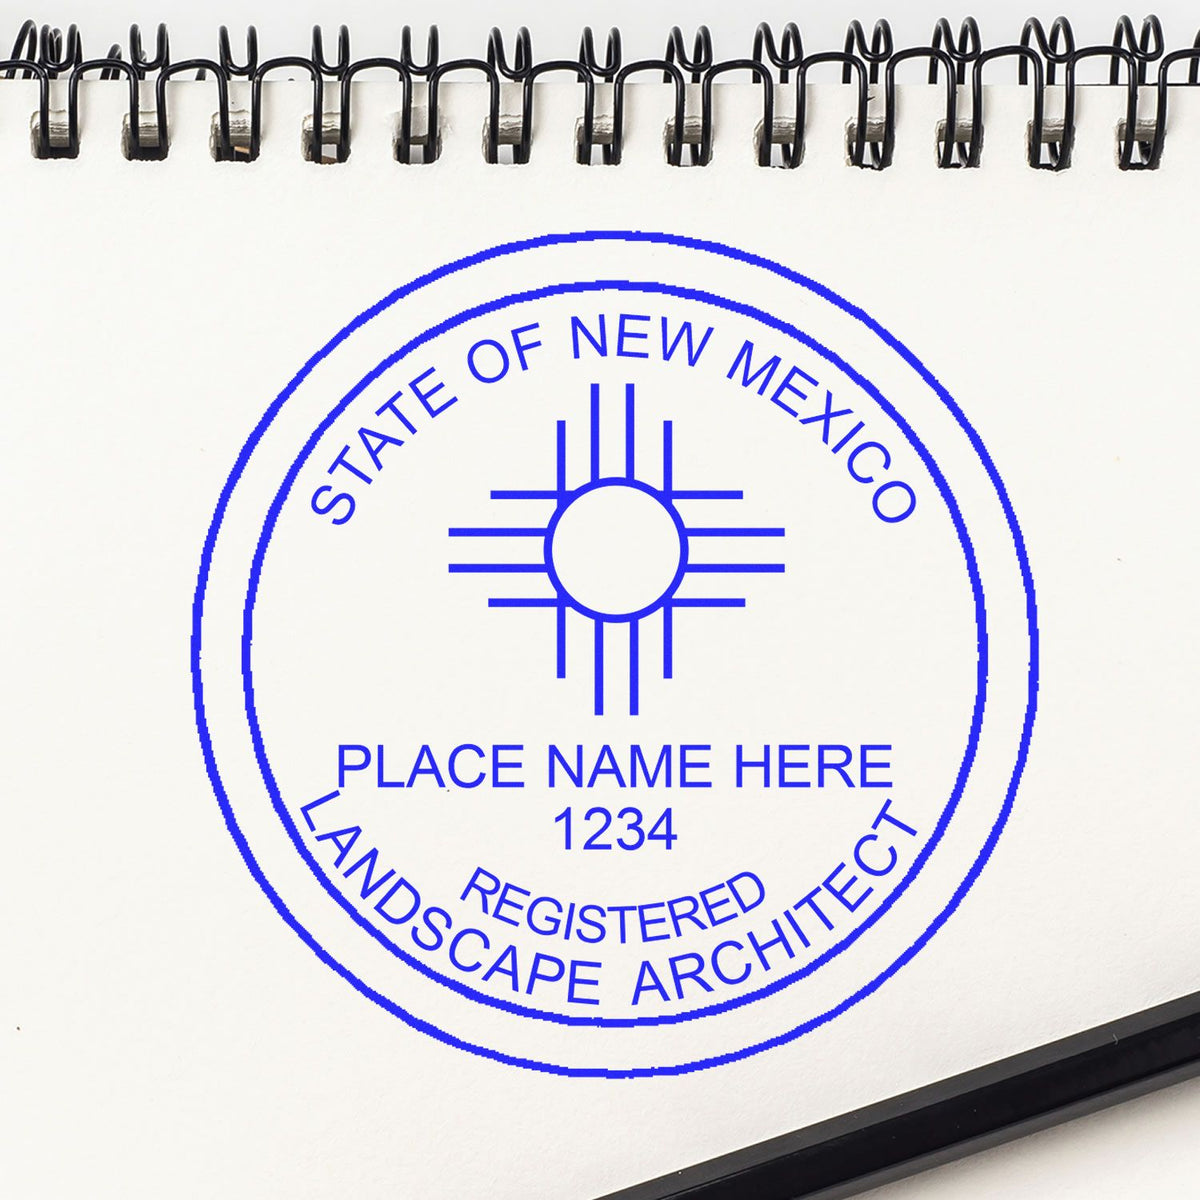 The Slim Pre-Inked New Mexico Landscape Architect Seal Stamp stamp impression comes to life with a crisp, detailed photo on paper - showcasing true professional quality.